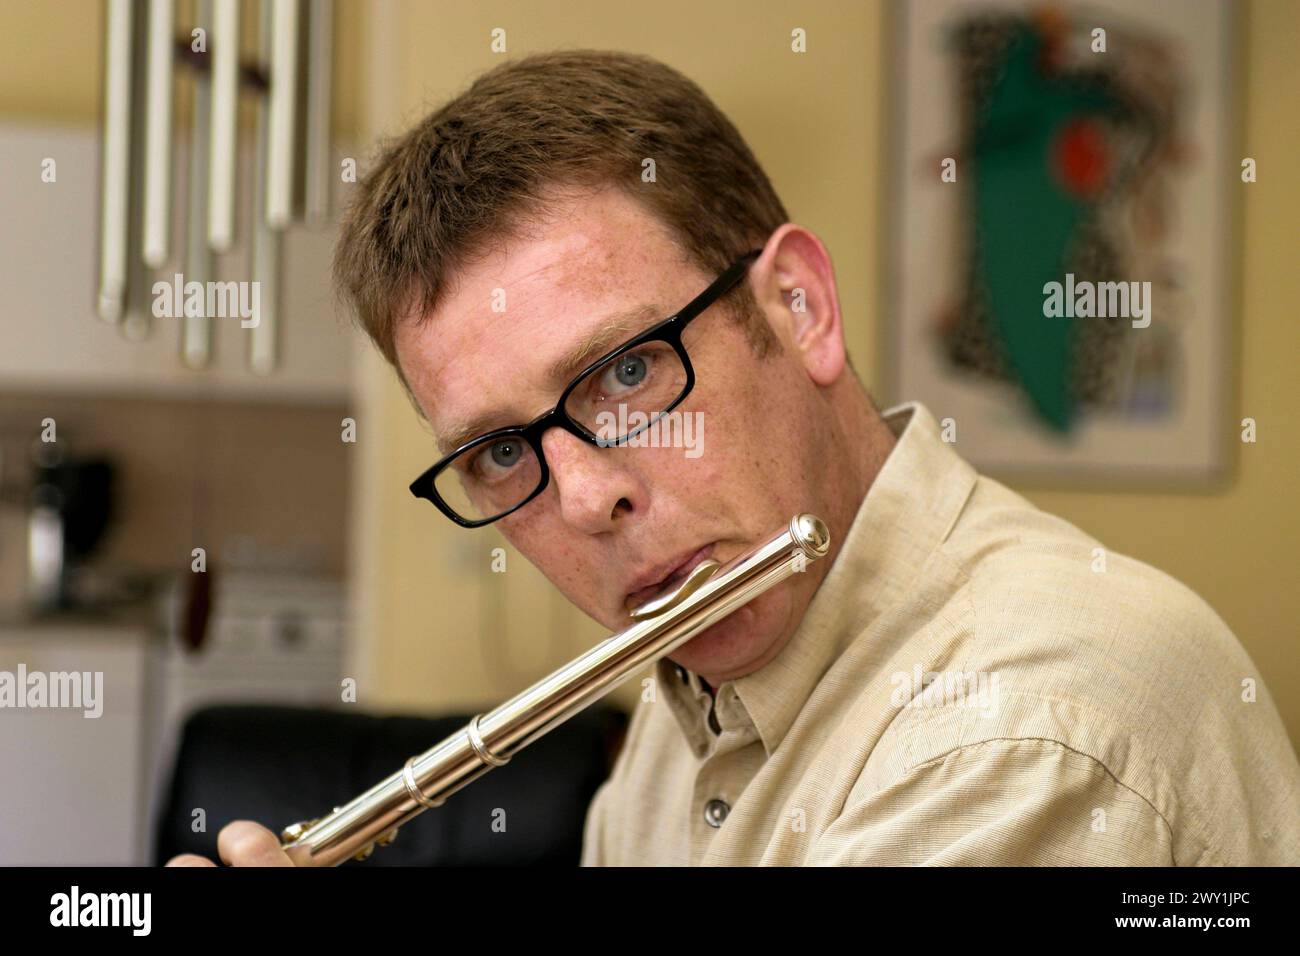 Man playing the Flute Portrait of a 39 year old male wearing glasses and playing the flute. This music instrument is usually associaled with women. By RC. Tilburg, Netherlands. MRYES Tilburg Studio Tuinstraat Noord-Brabant Nederland Copyright: xGuidoxKoppesx Stock Photo